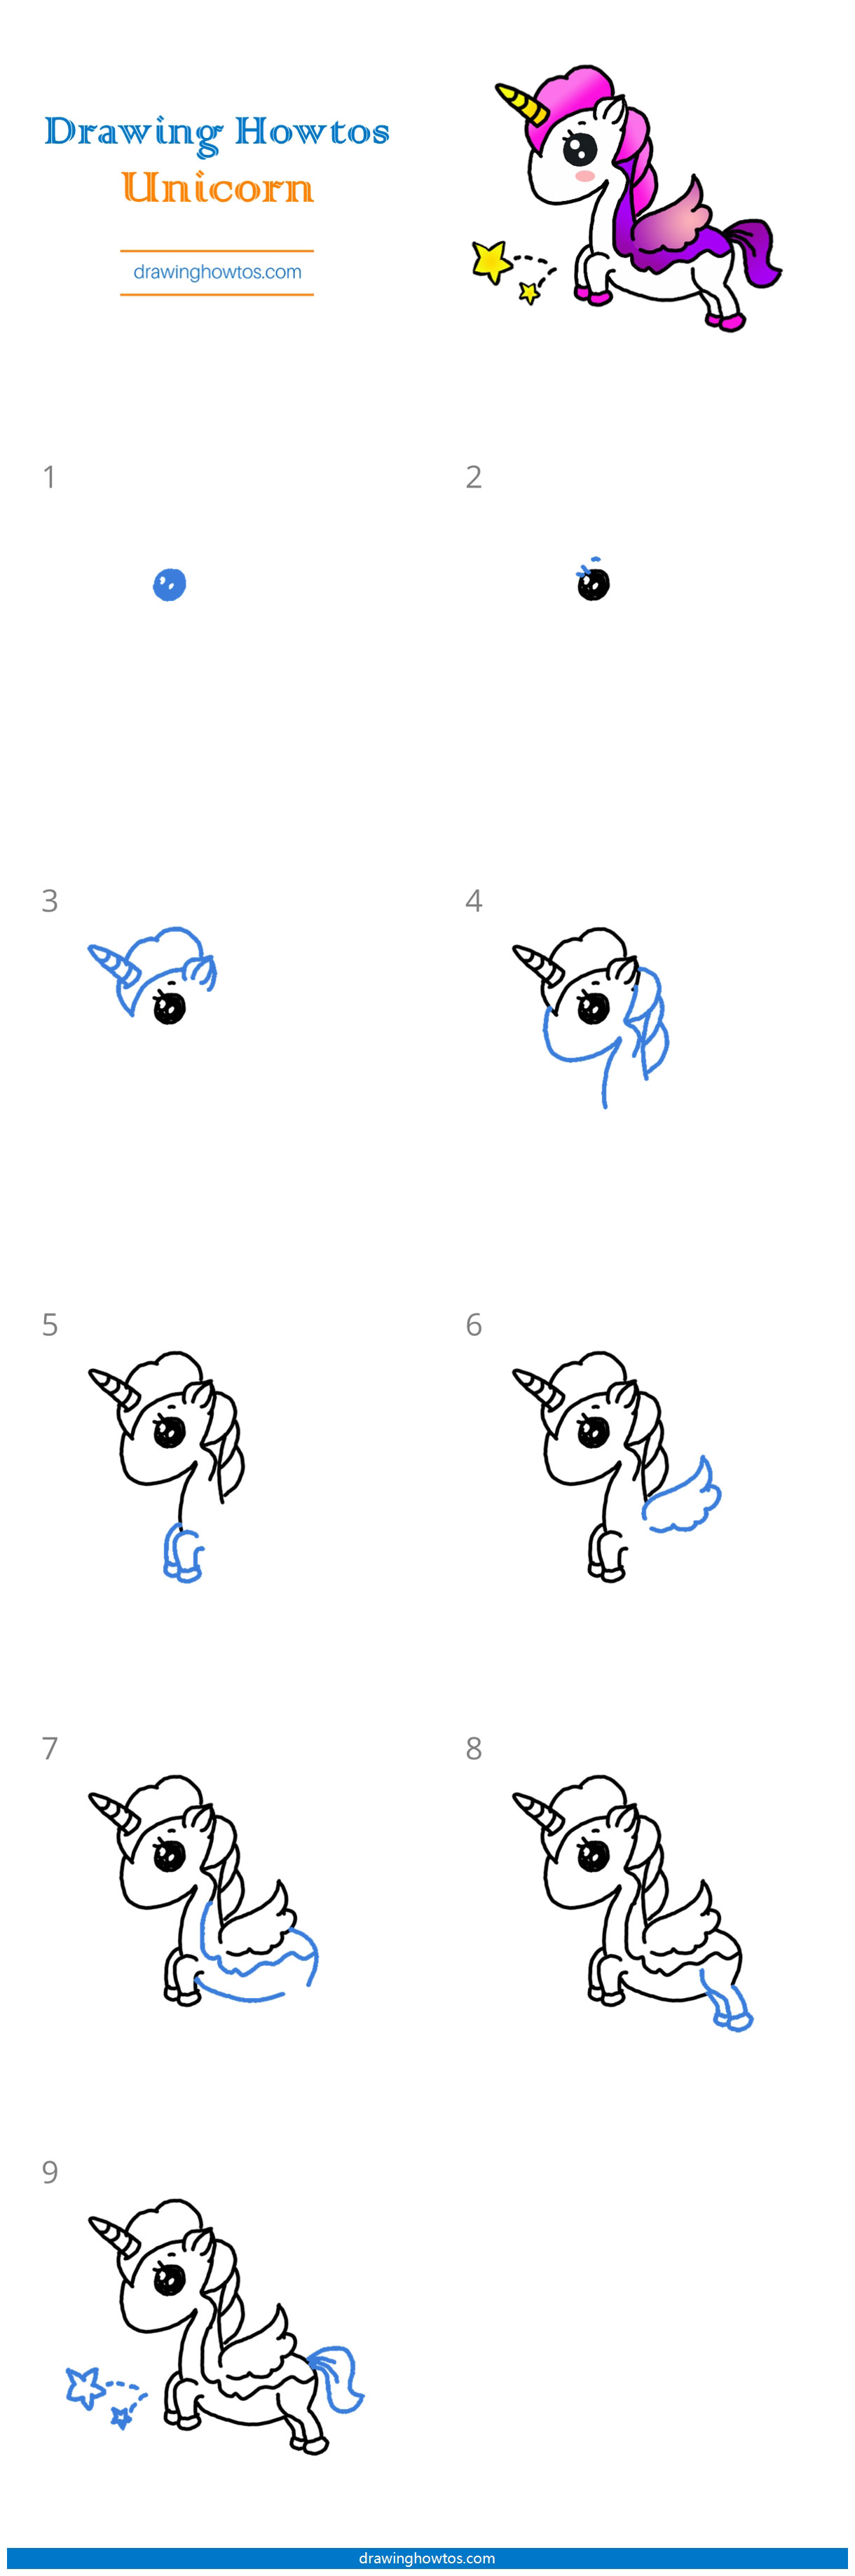 How to Draw a Unicorn - Step by Step Easy Drawing Guides - Drawing Howtos